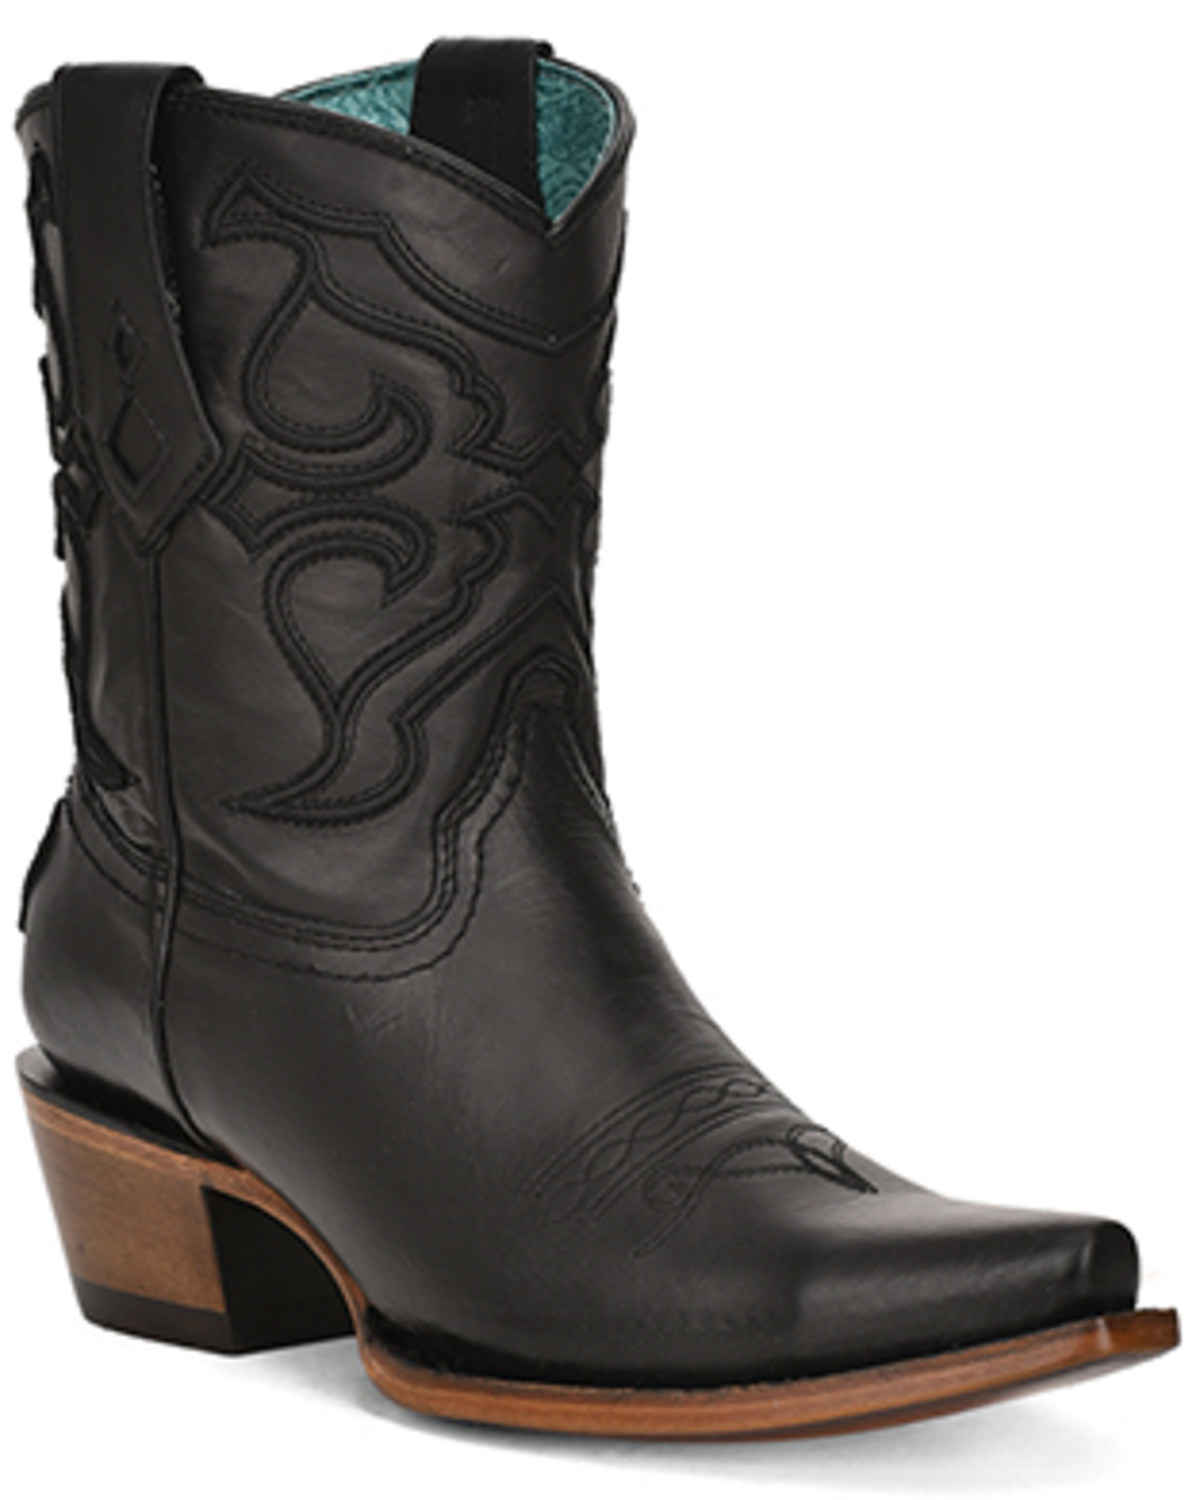 Corral Women's Embroidered Ankle Western Boots